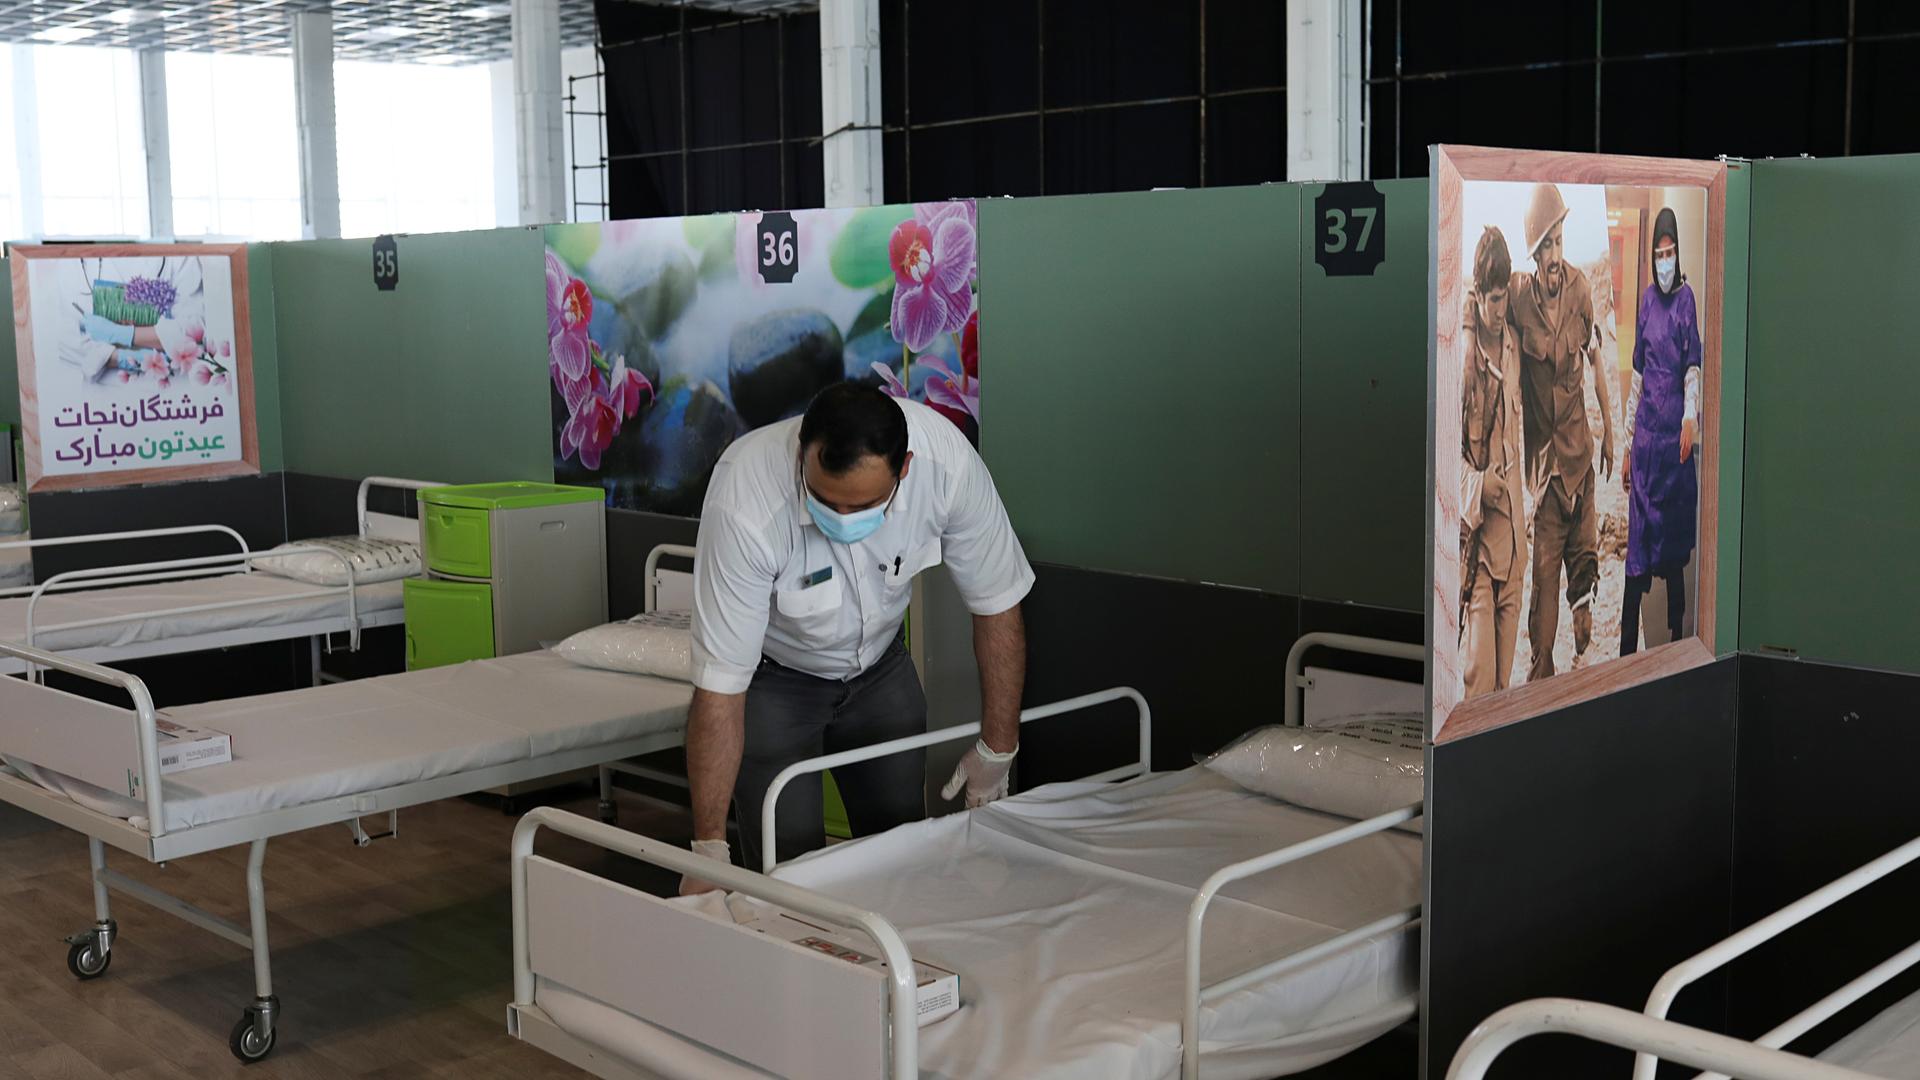 A man makes a bed in a row of beds with medical posters on the dividing walls 